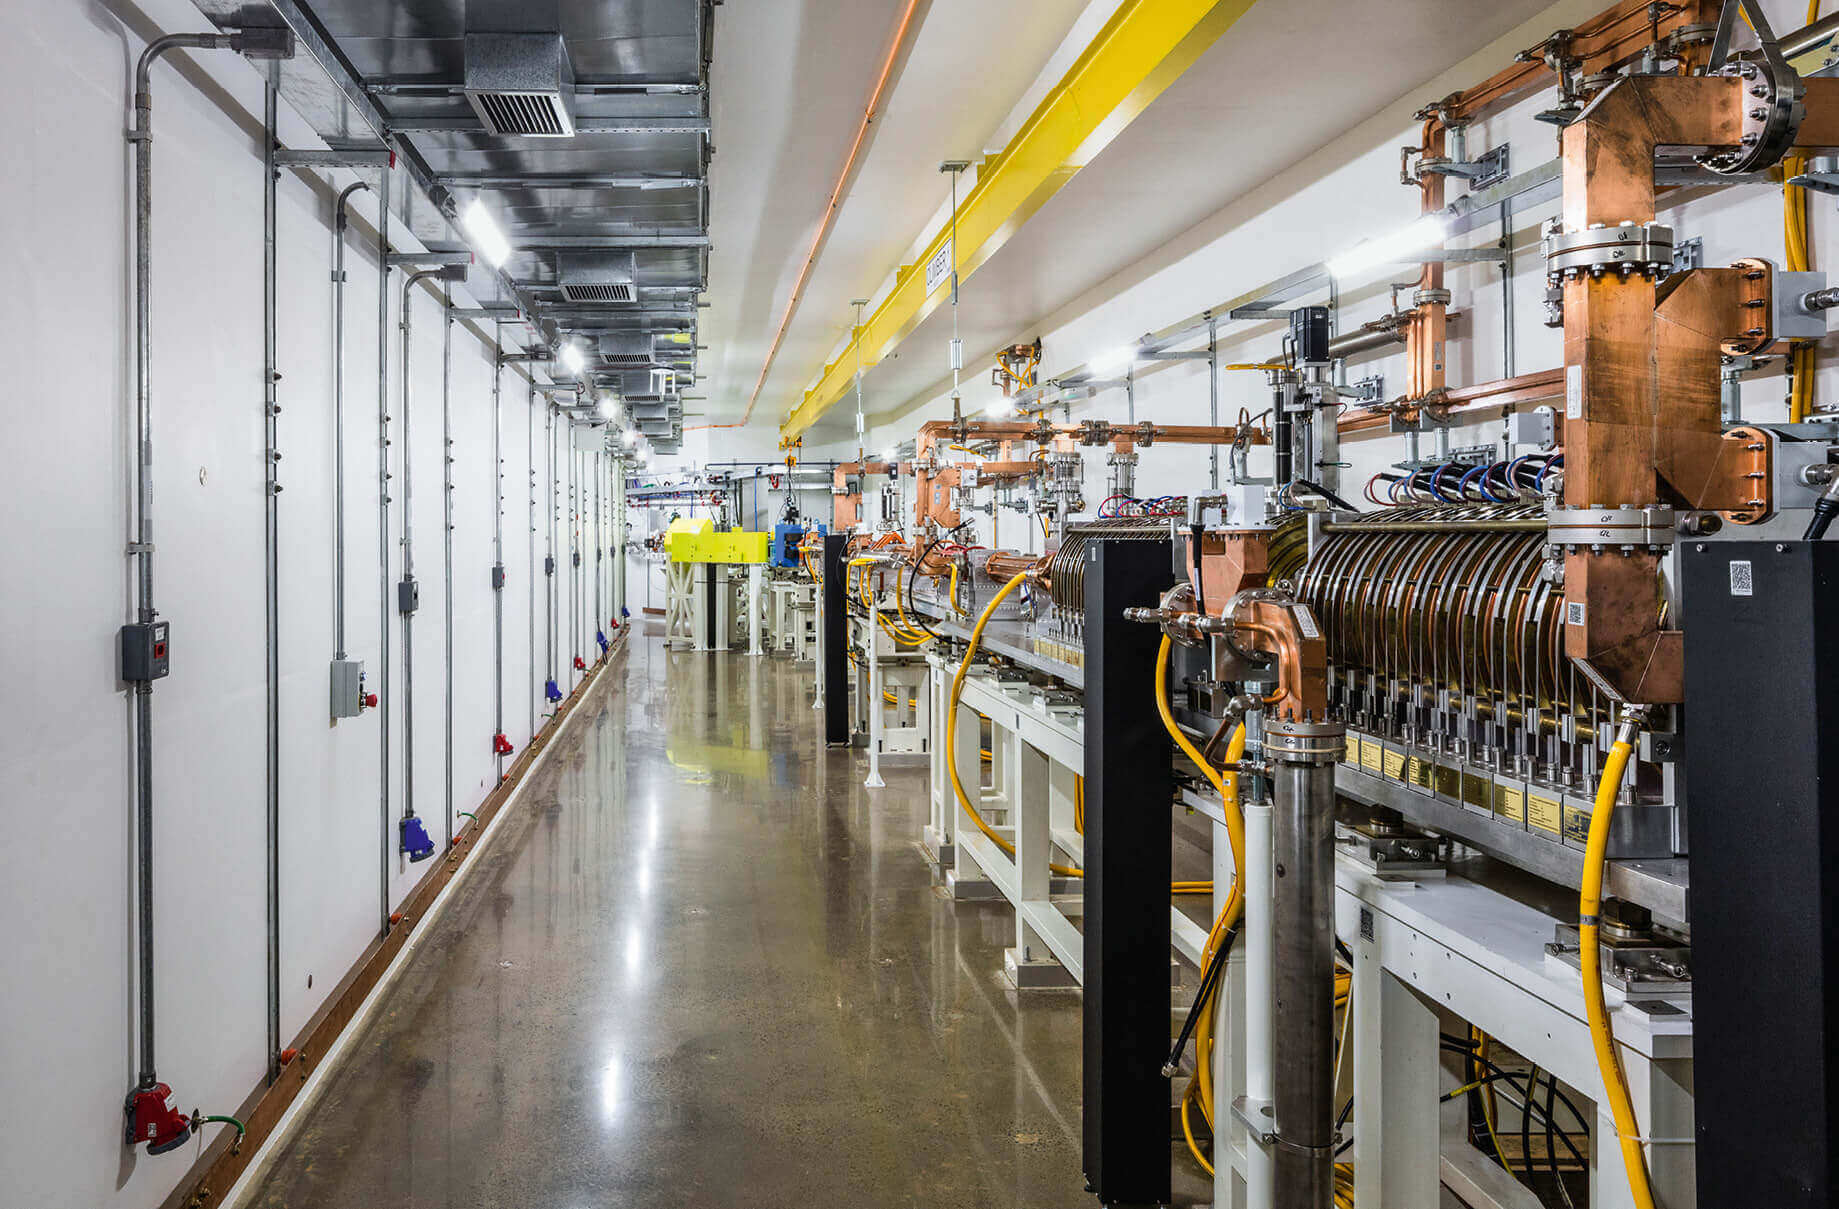 Inside the particle accelerator: It is forbidden to use the huge building’s corridors while the particle accelerator is switched on. However, the same corridors become busy thoroughfares when staff are busy assembling or testing components.